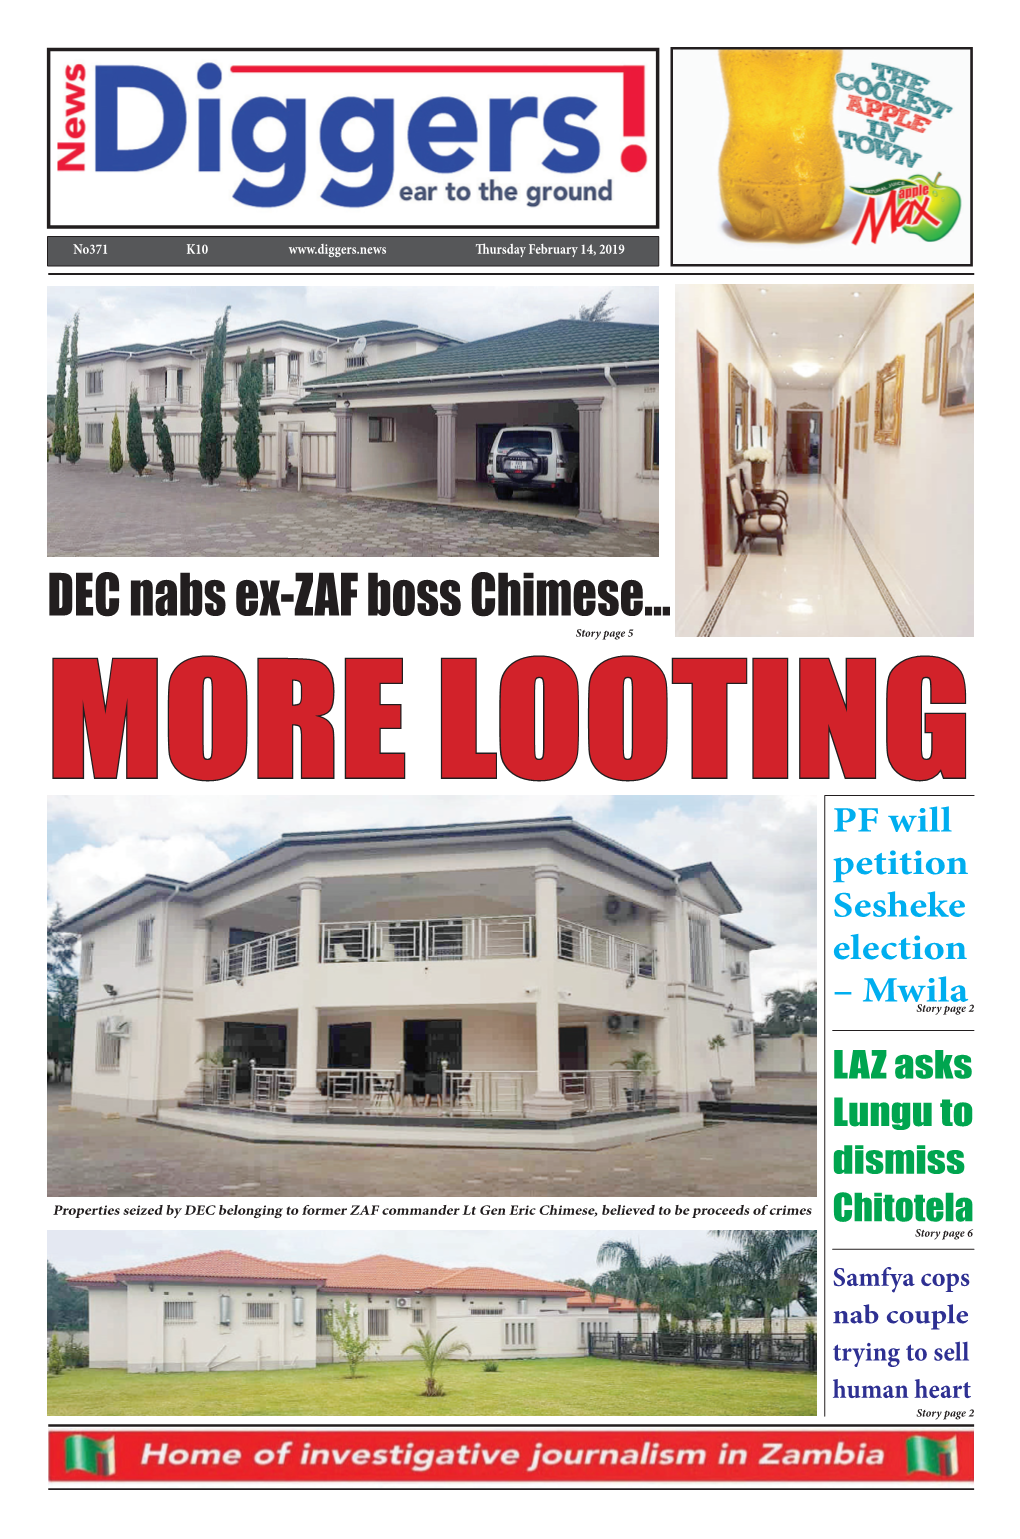 DEC Nabs Ex-ZAF Boss Chimese... Story Page 5 MORE LOOTING PF Will Petition Sesheke Election